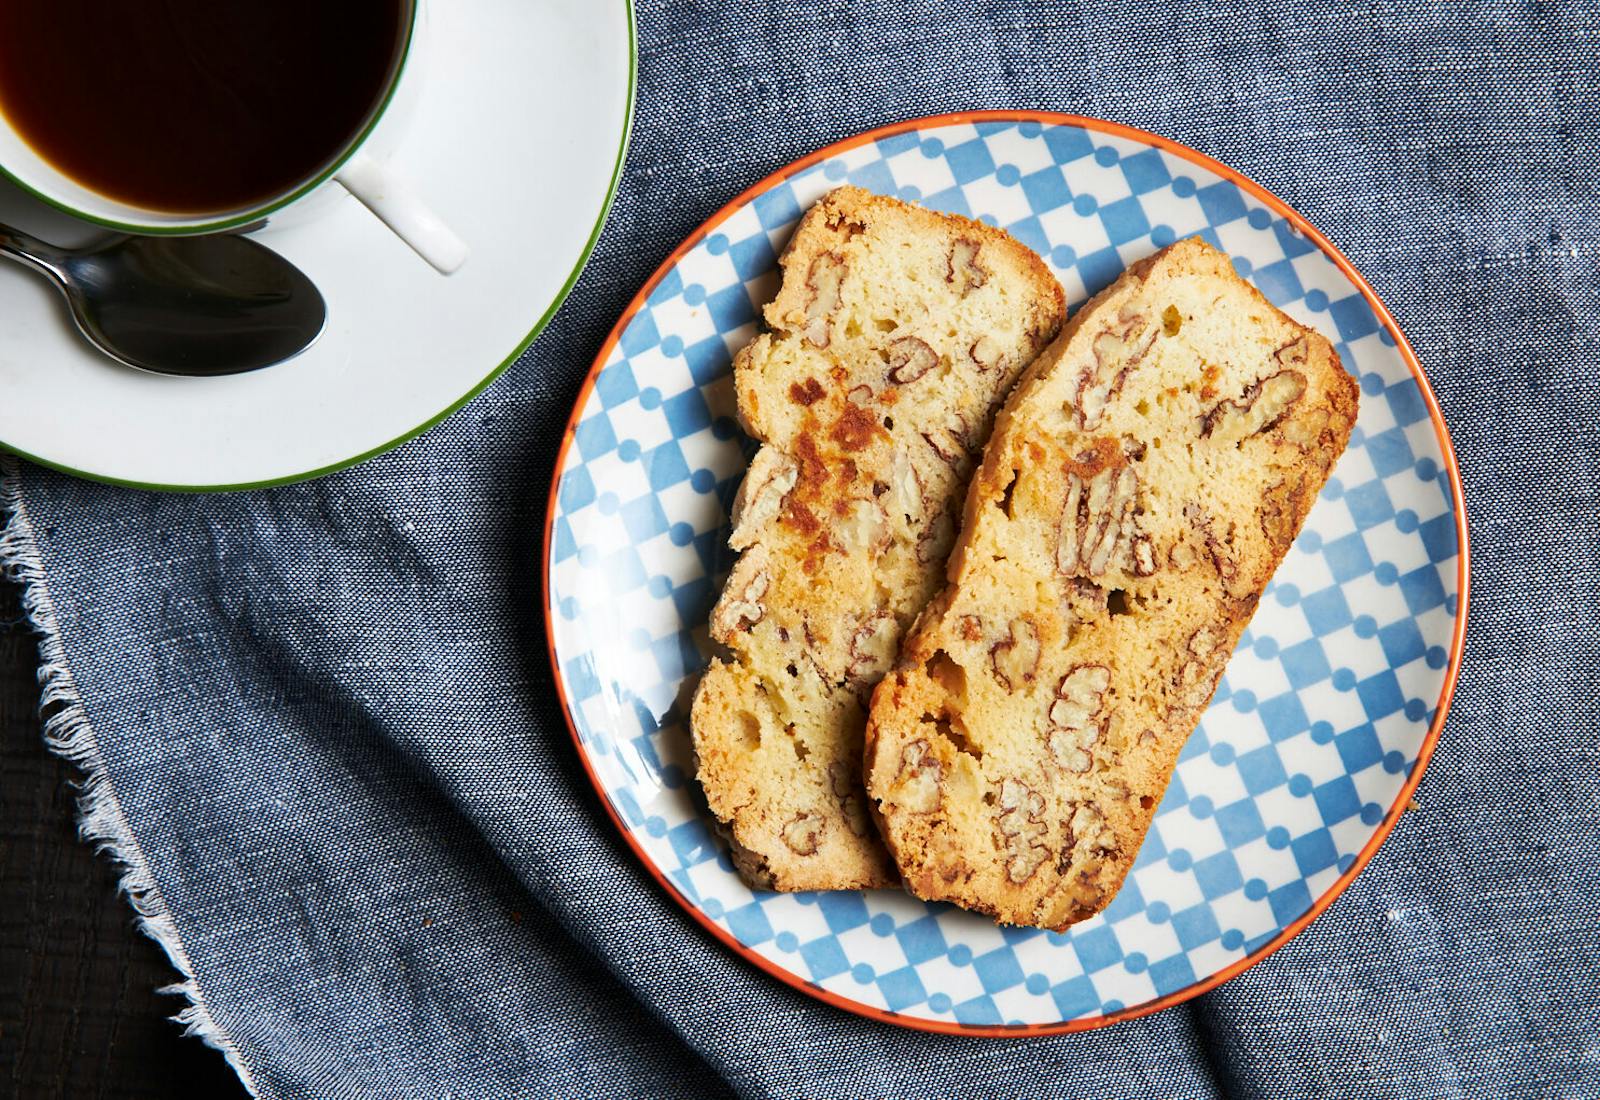 Slices of walnut mandel bread on blue and orange patterned dish with cup of coffee atop grey cloth.